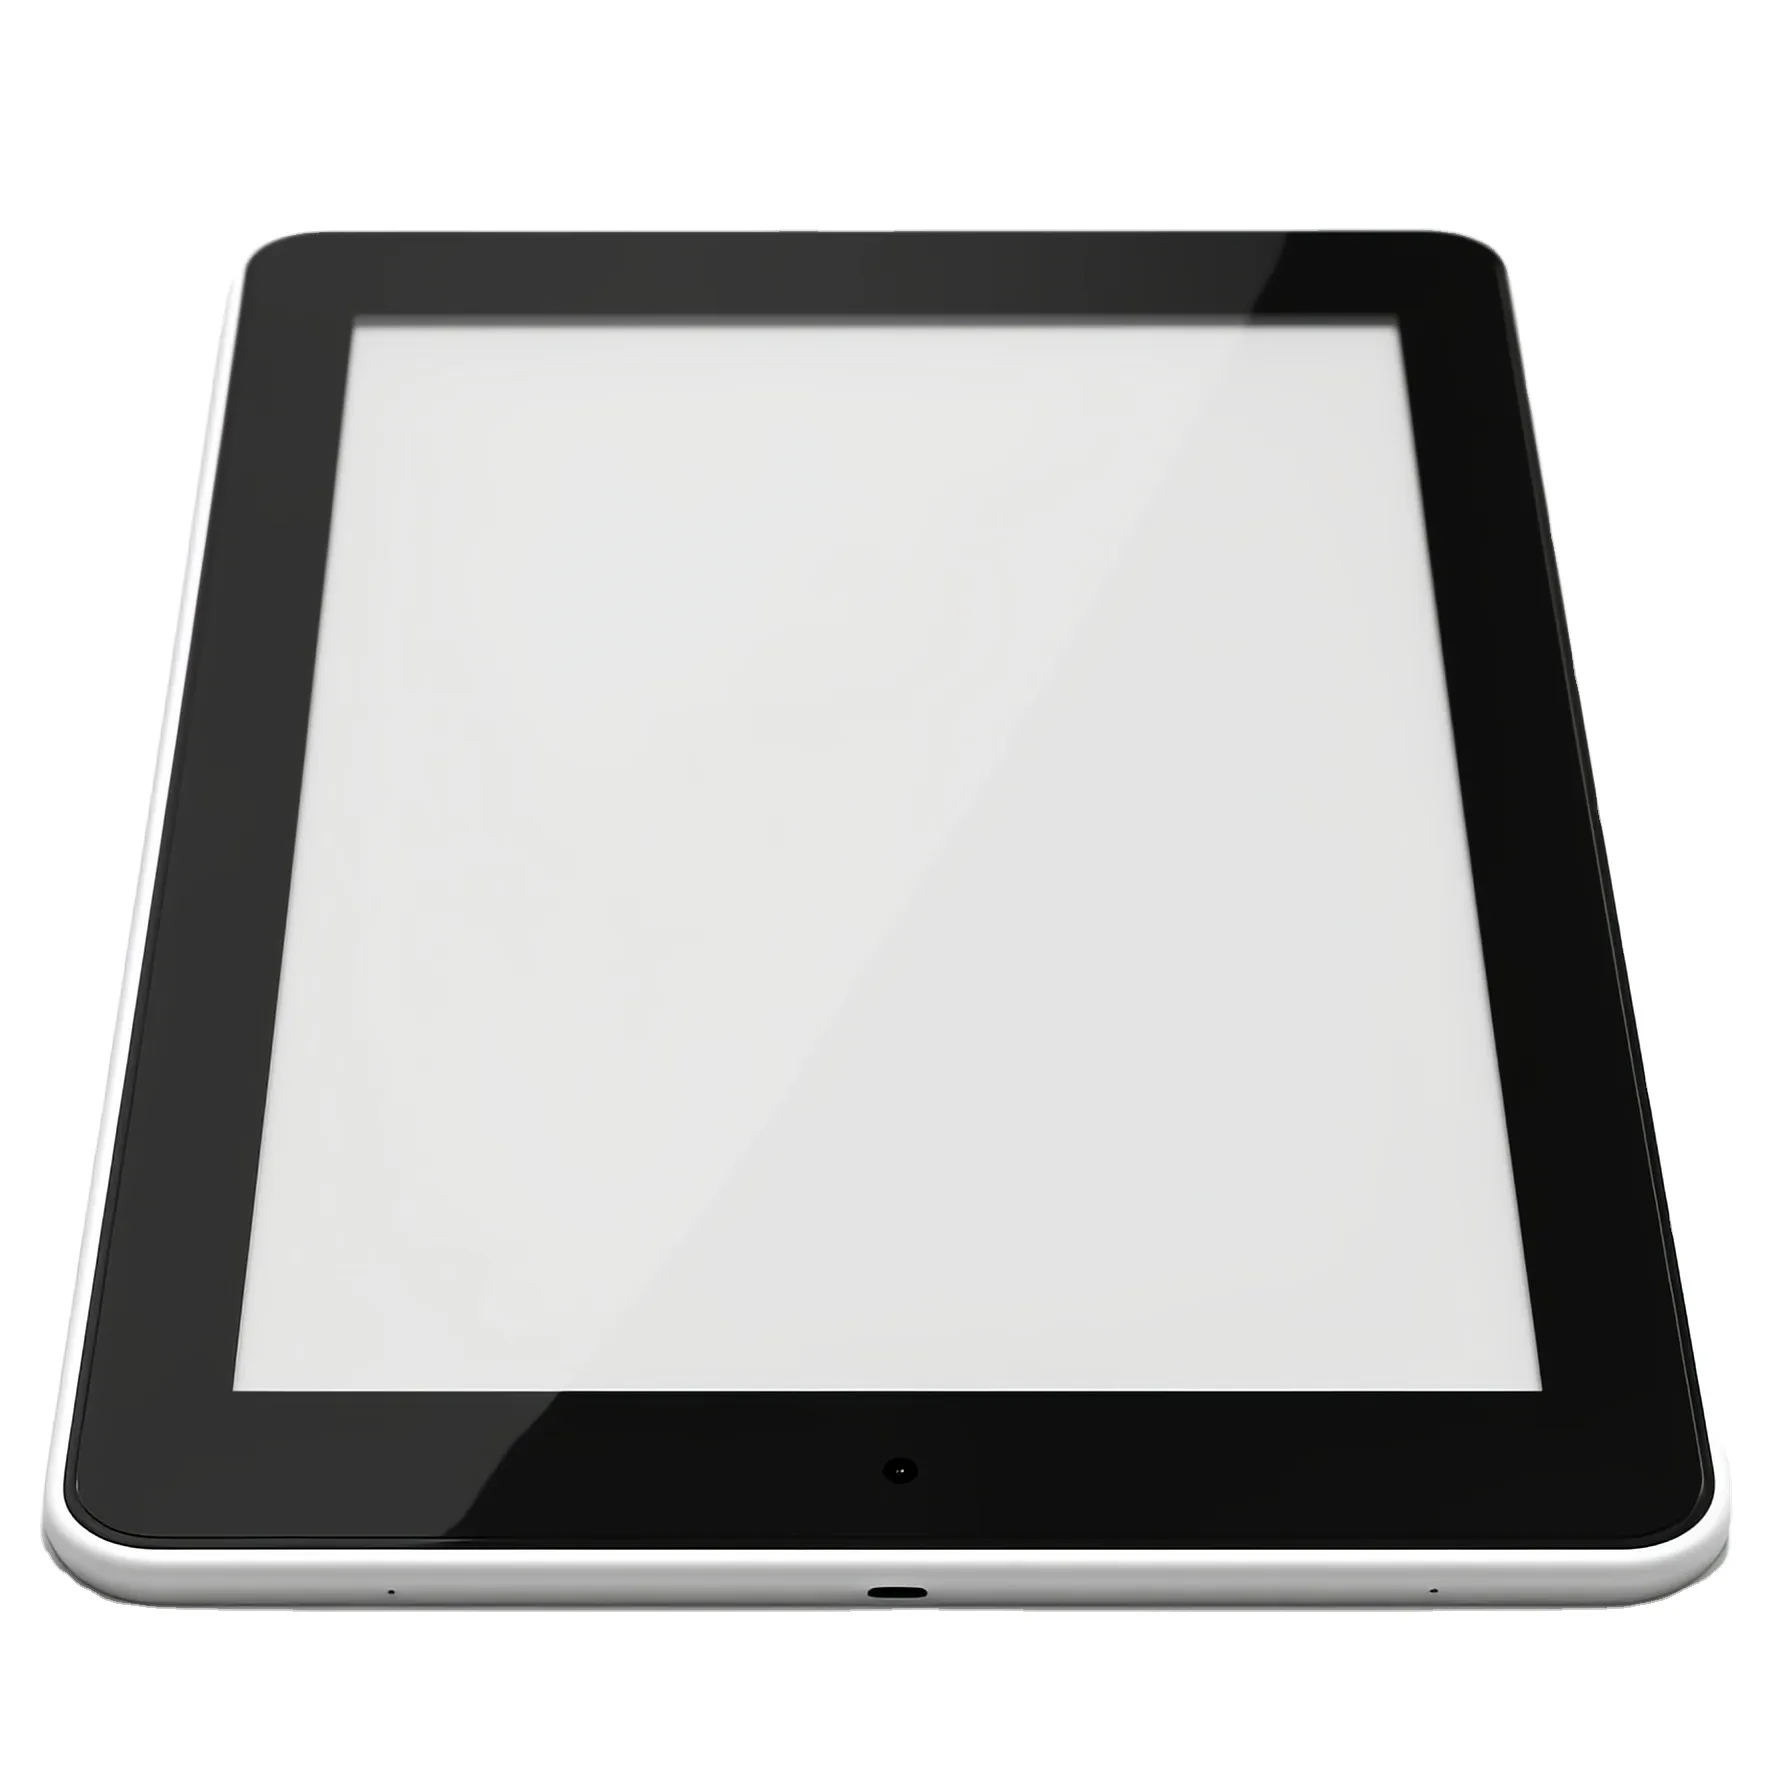 13.3inch Capacitive Touch Screen Pc For Industrial 10 Points